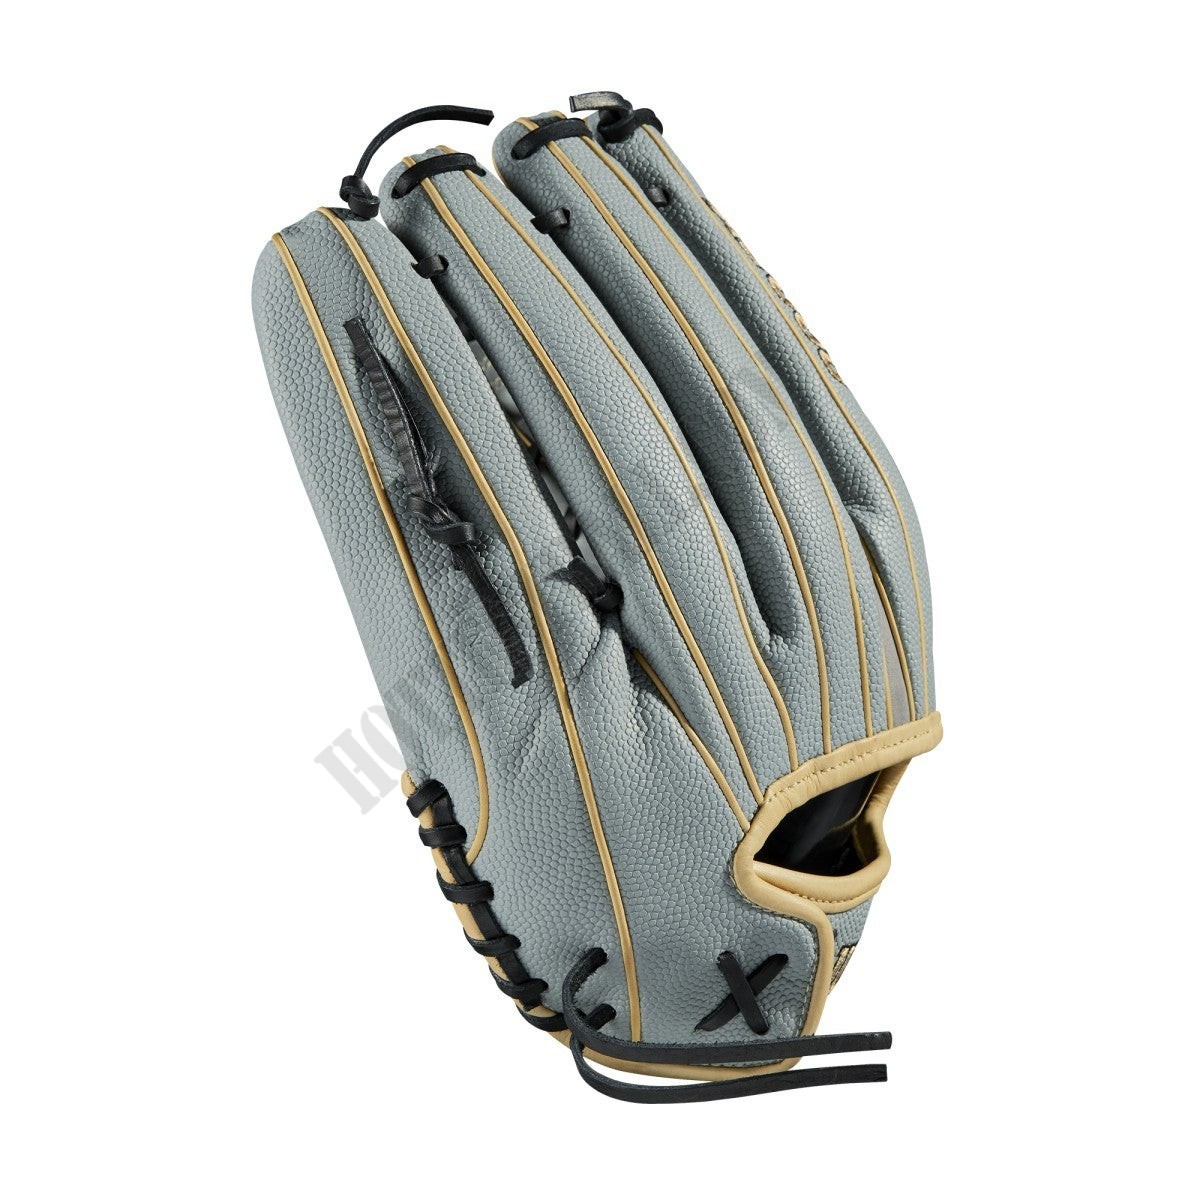 2021 A2000 T125SS 12.5" Outfield Fastpitch Glove ● Wilson Promotions - -4